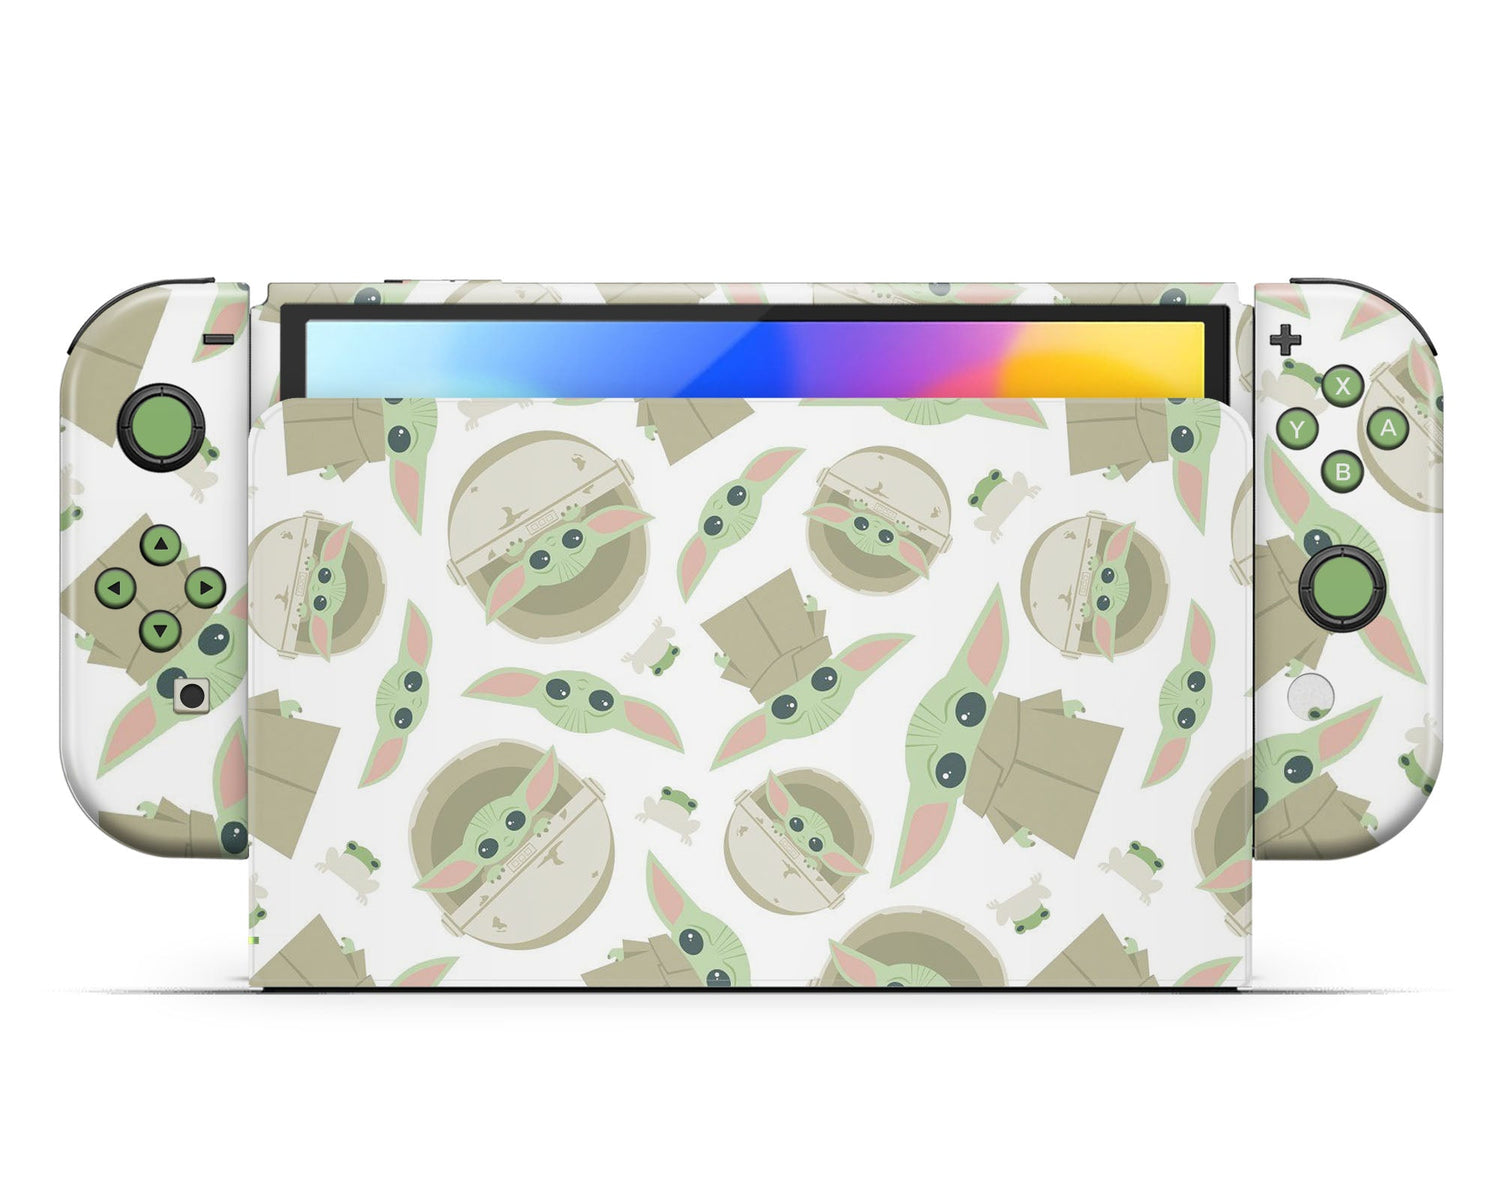 Lux Skins Nintendo Switch OLED Green Baby Yoda Pattern Joycons Only Skins - Pop culture Star Wars Skin